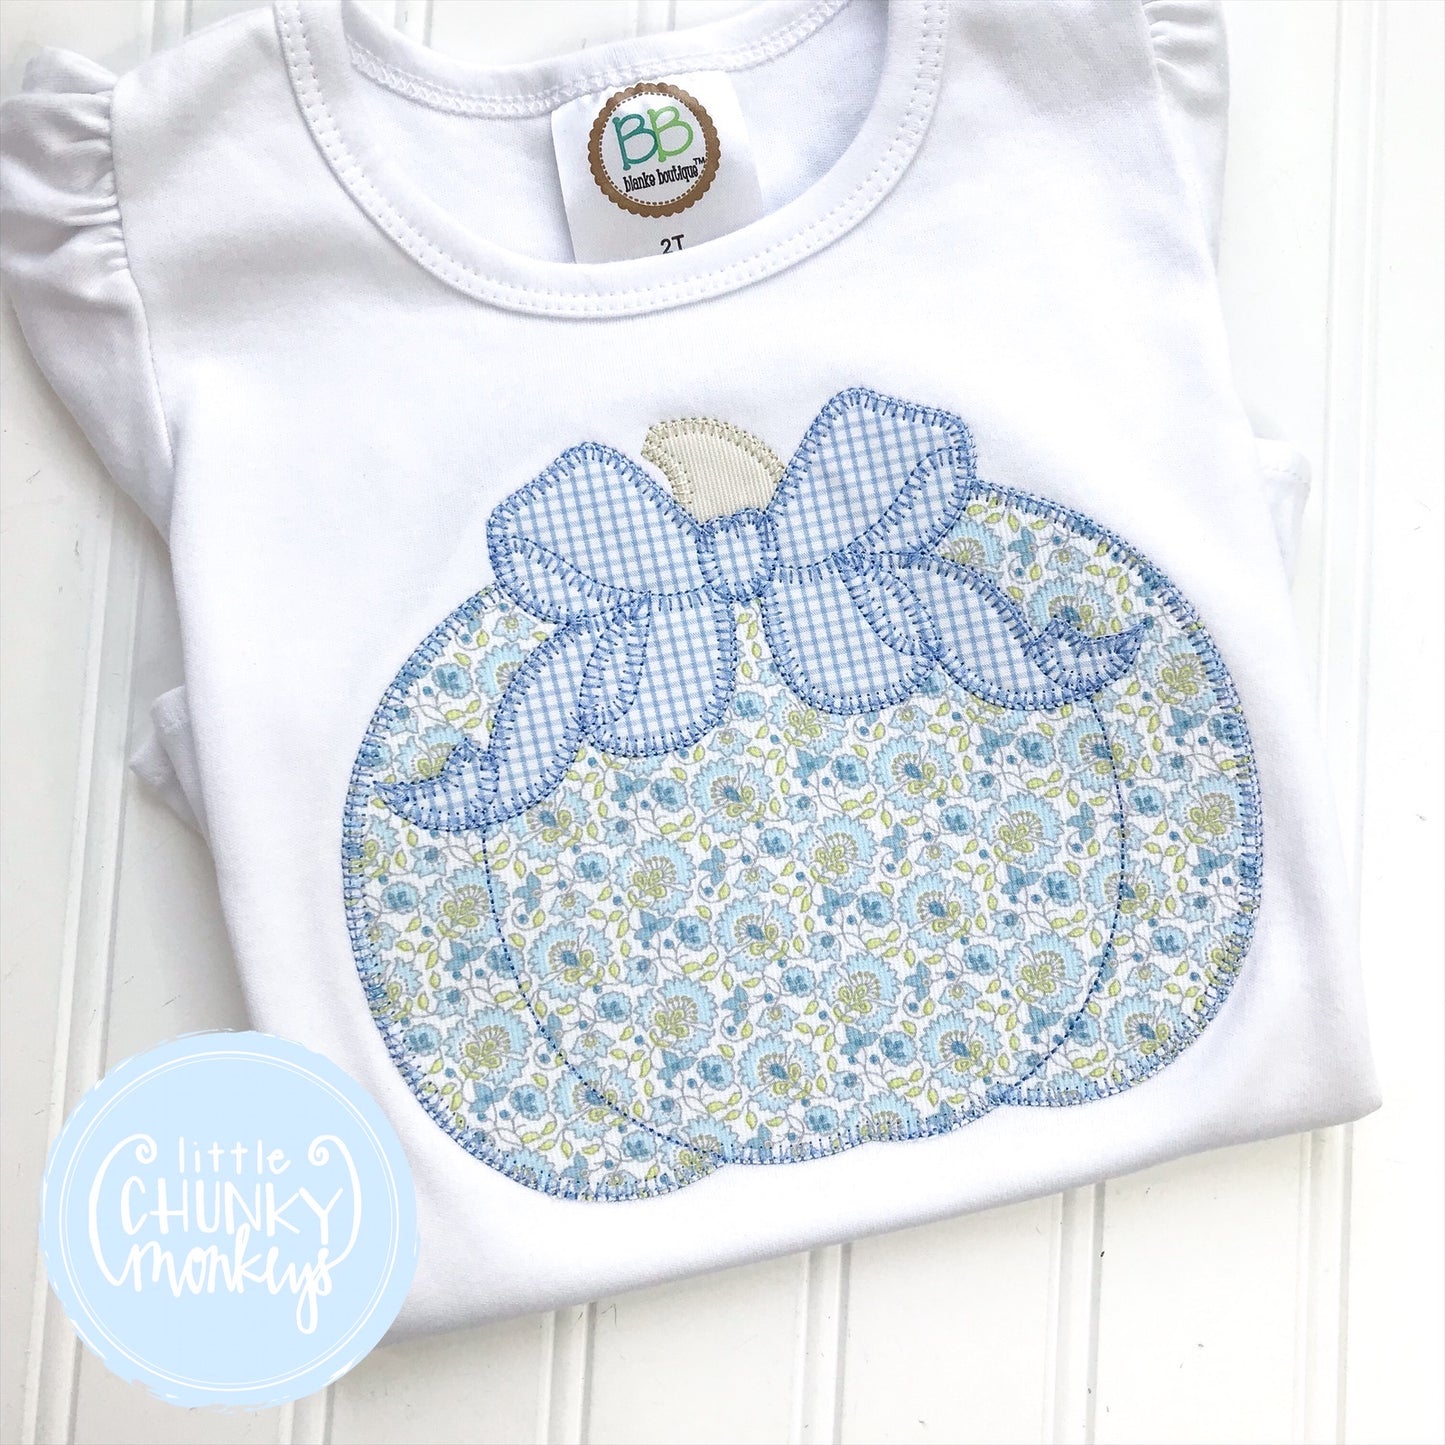 Girl Shirt- Appliqué Floral Pumpkin with Bow + Personalization